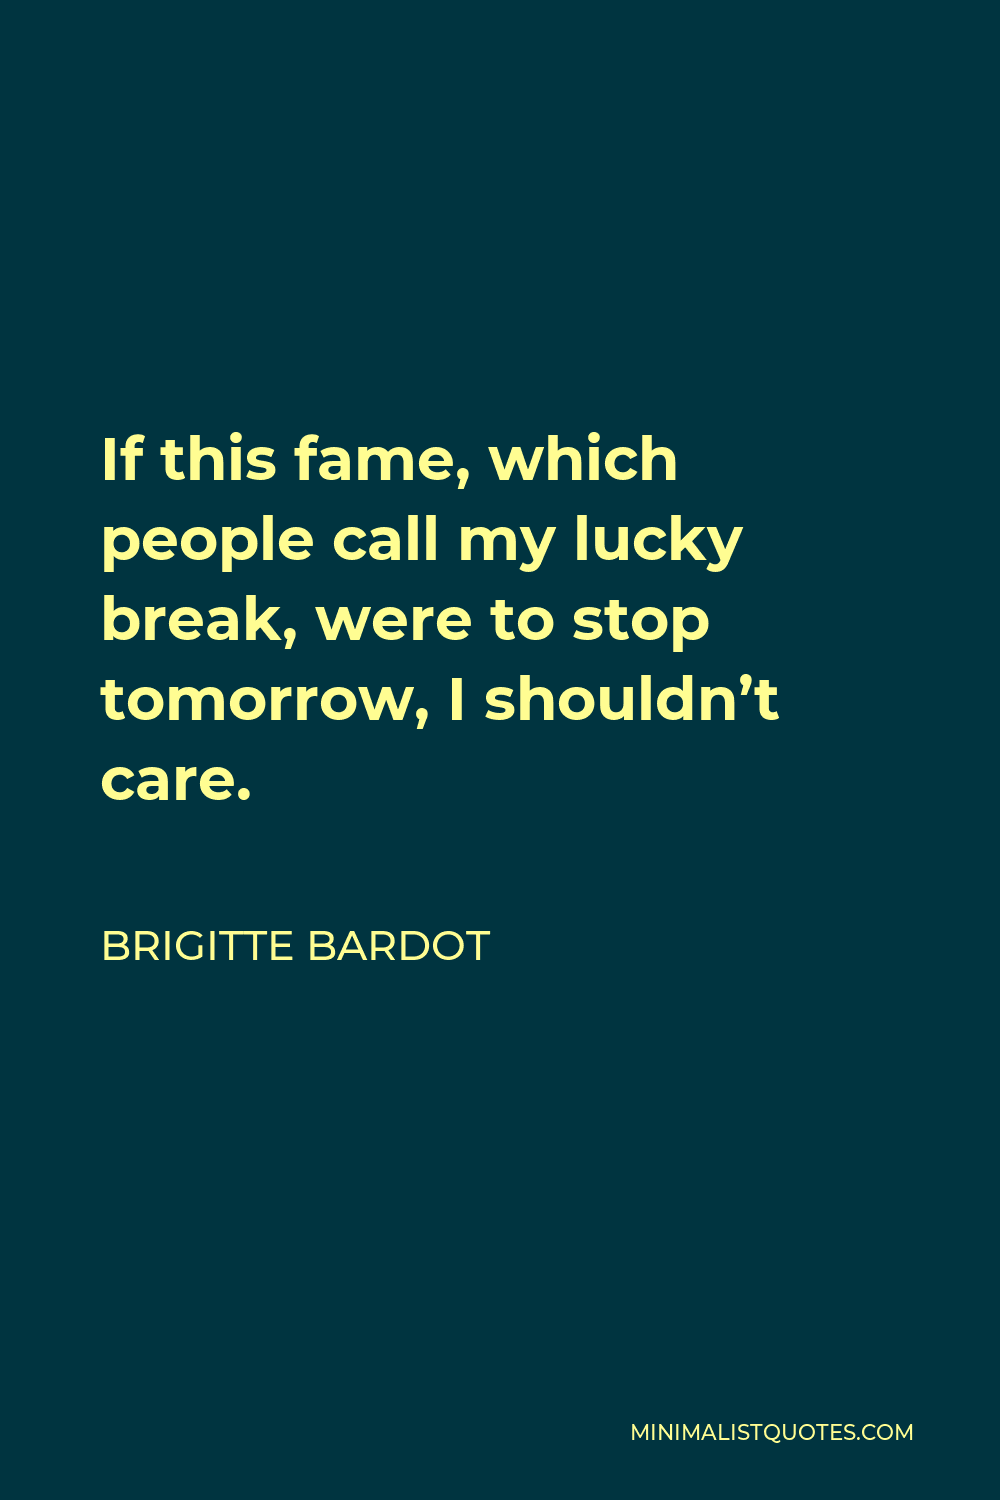 Brigitte Bardot Quote - If this fame, which people call my lucky break, were to stop tomorrow, I shouldn’t care.